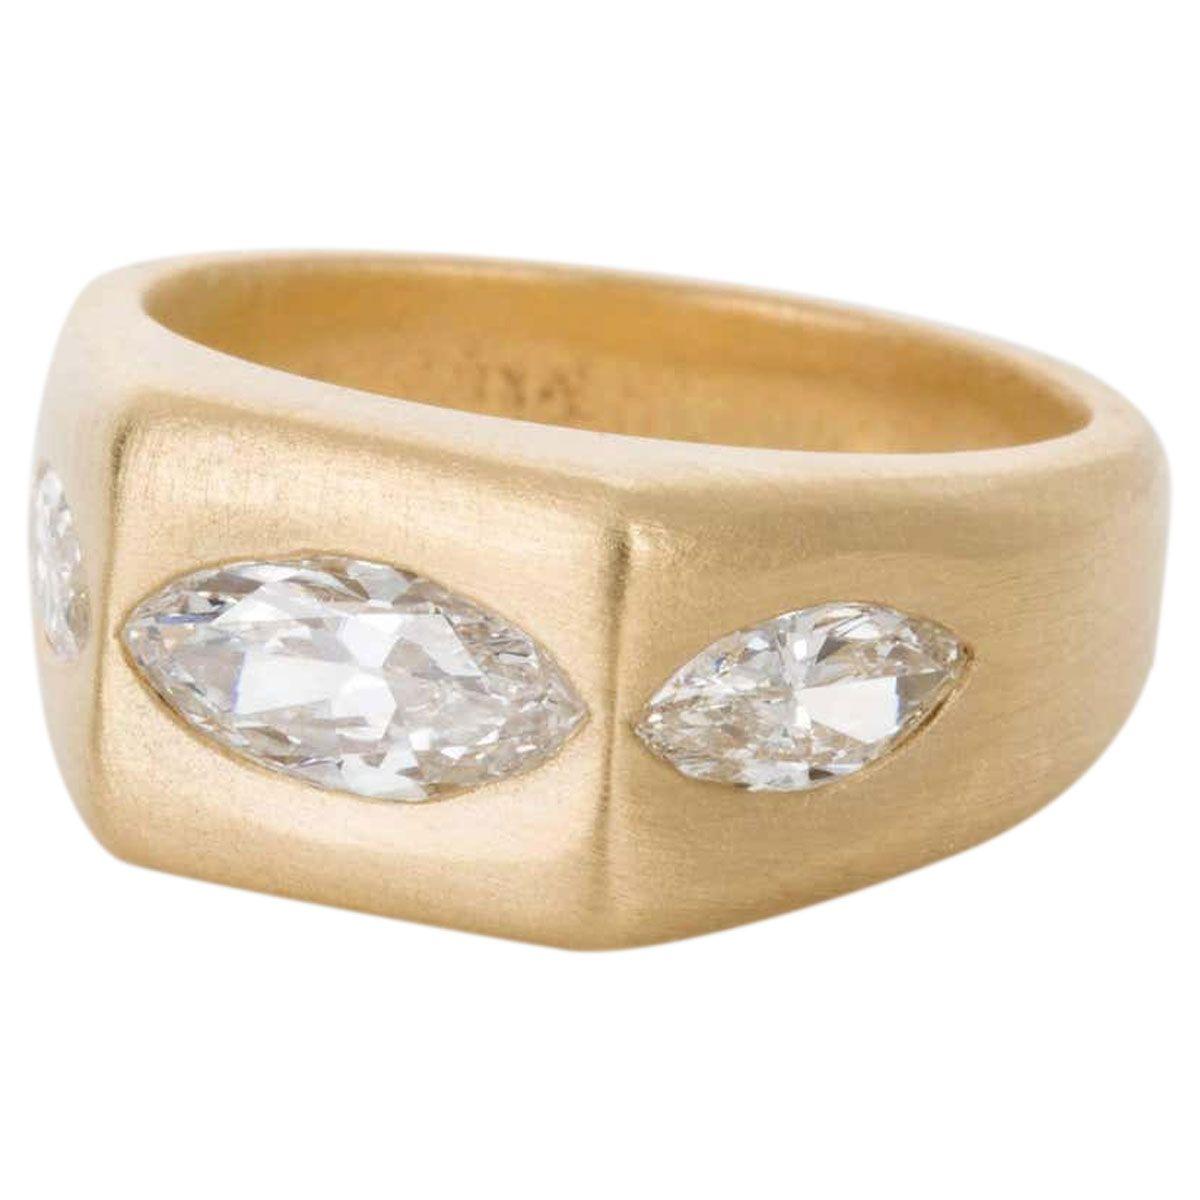 This ring is so wearable and fabulous. Three marquise cut diamonds hammer set into an 18k brushed yellow gold band, the diamonds weigh an approximate total of 1.72cts - H colour, VS2 - SI1 clarity. The brushed gold has so much contrast against the